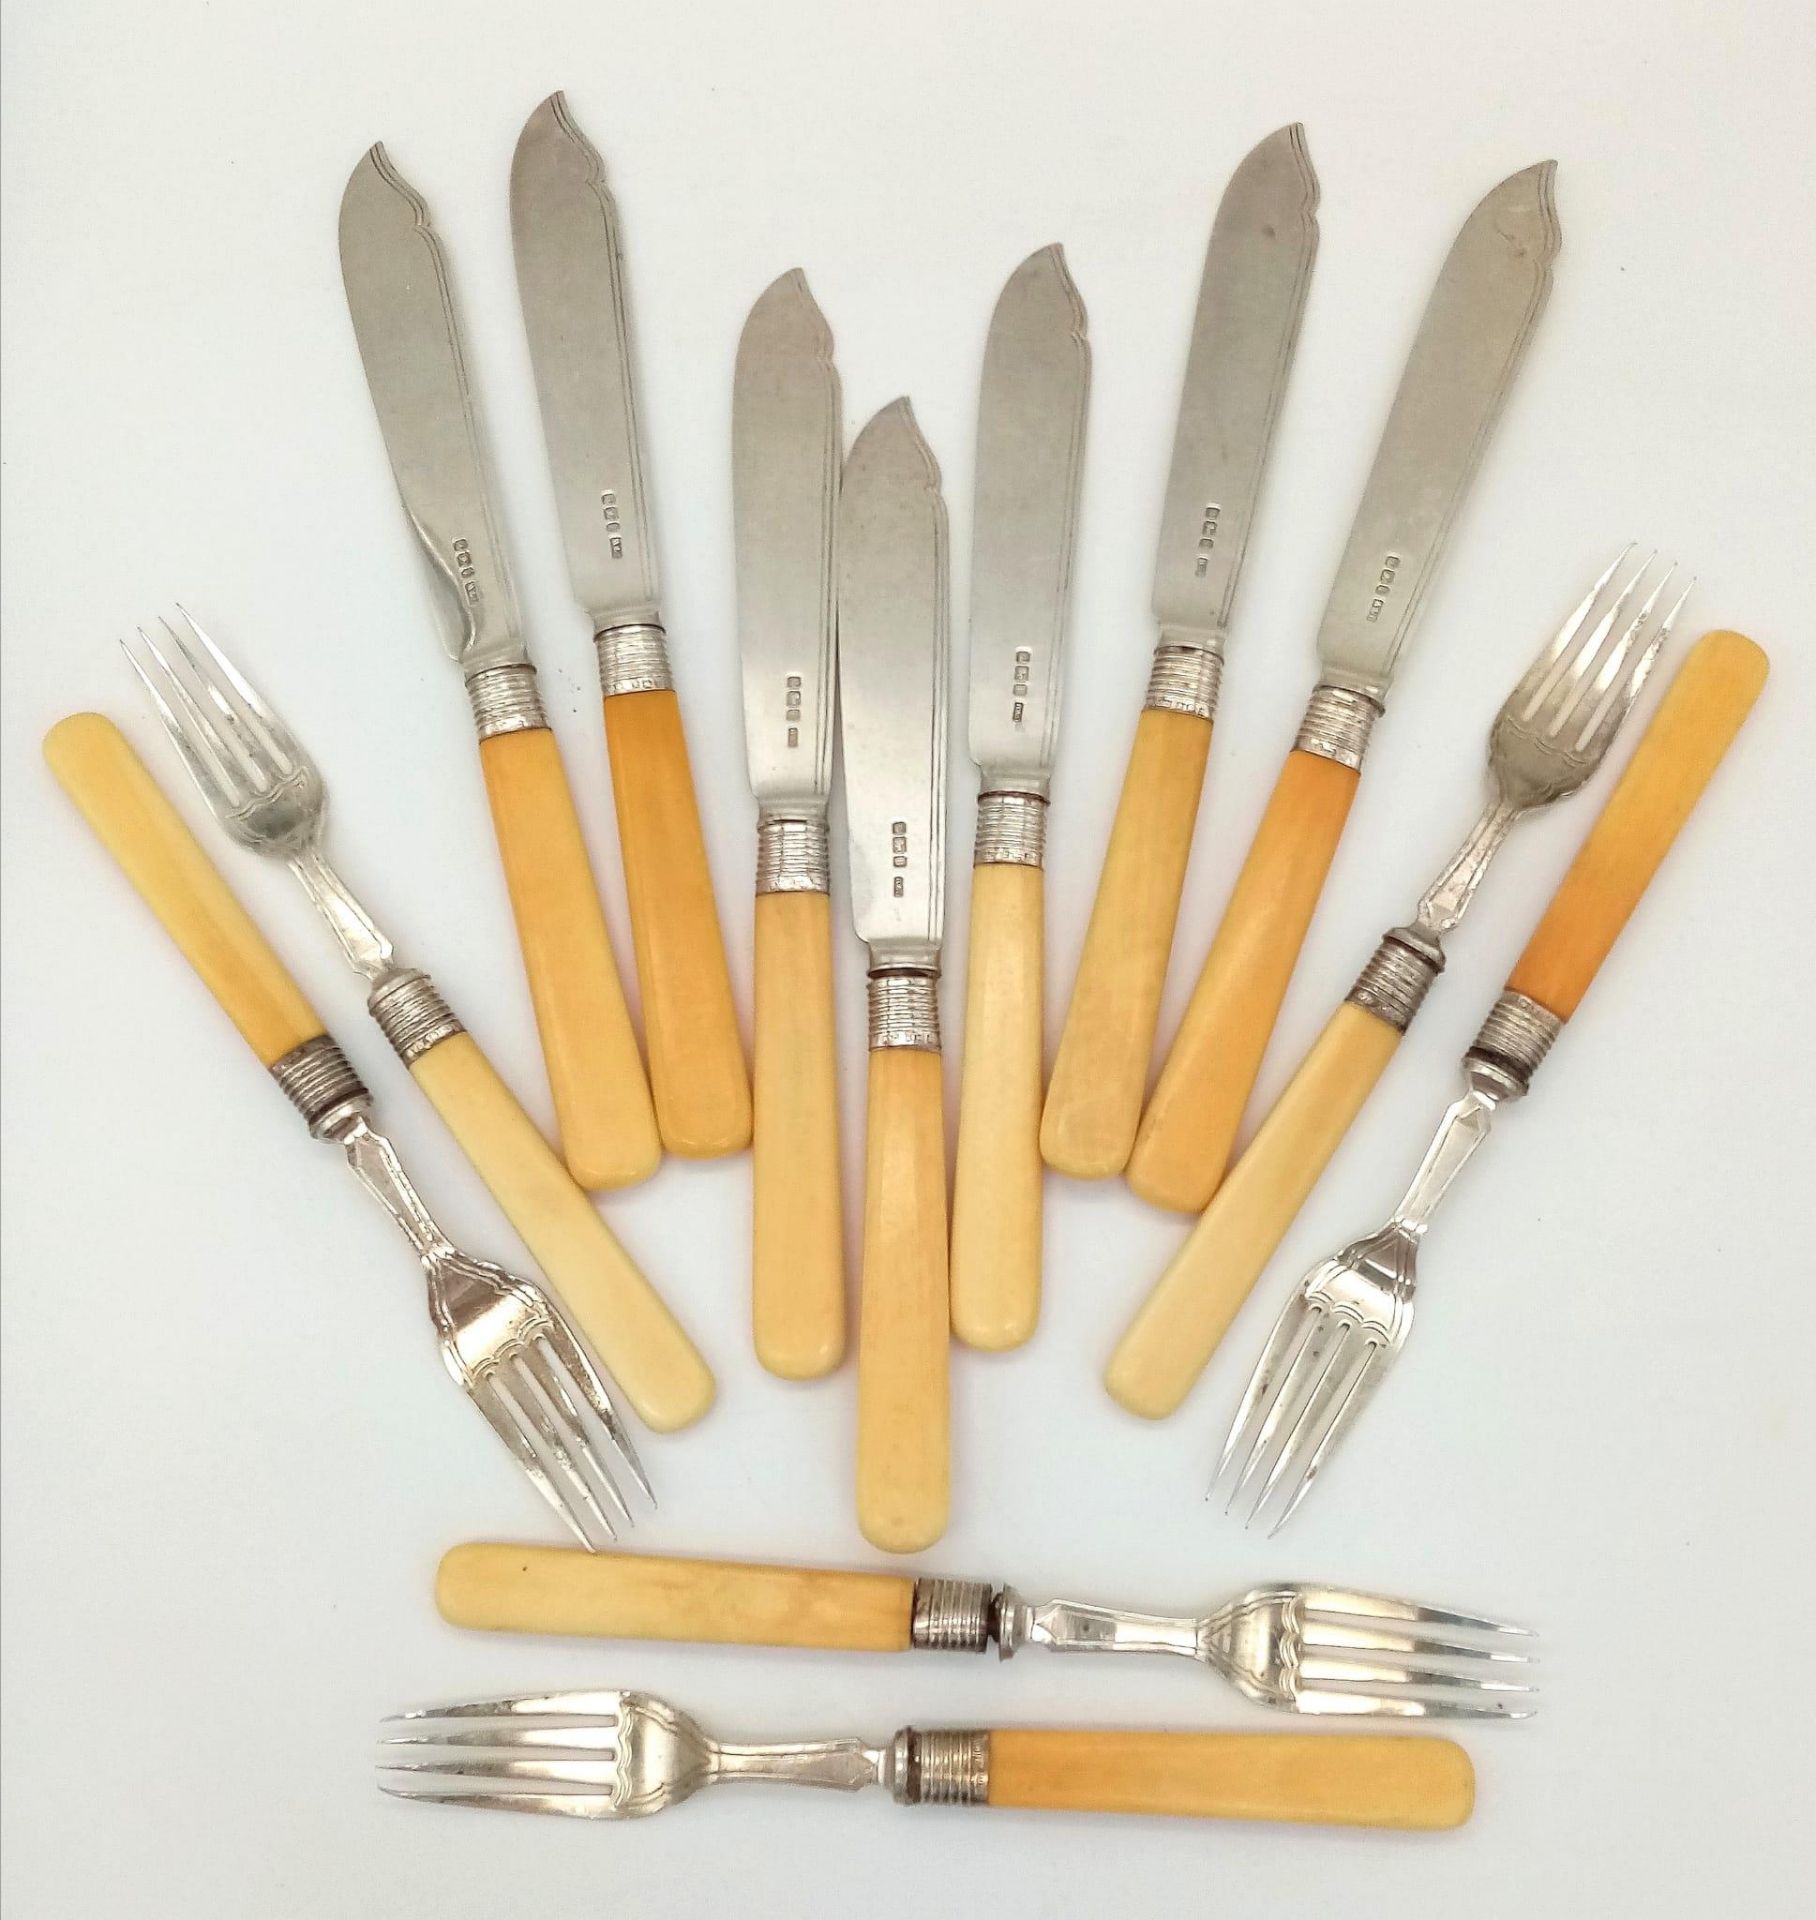 A Set of 13 Antique Sterling Silver Fish Knives and Forks. Bone handles. Hallmarks for Sheffield